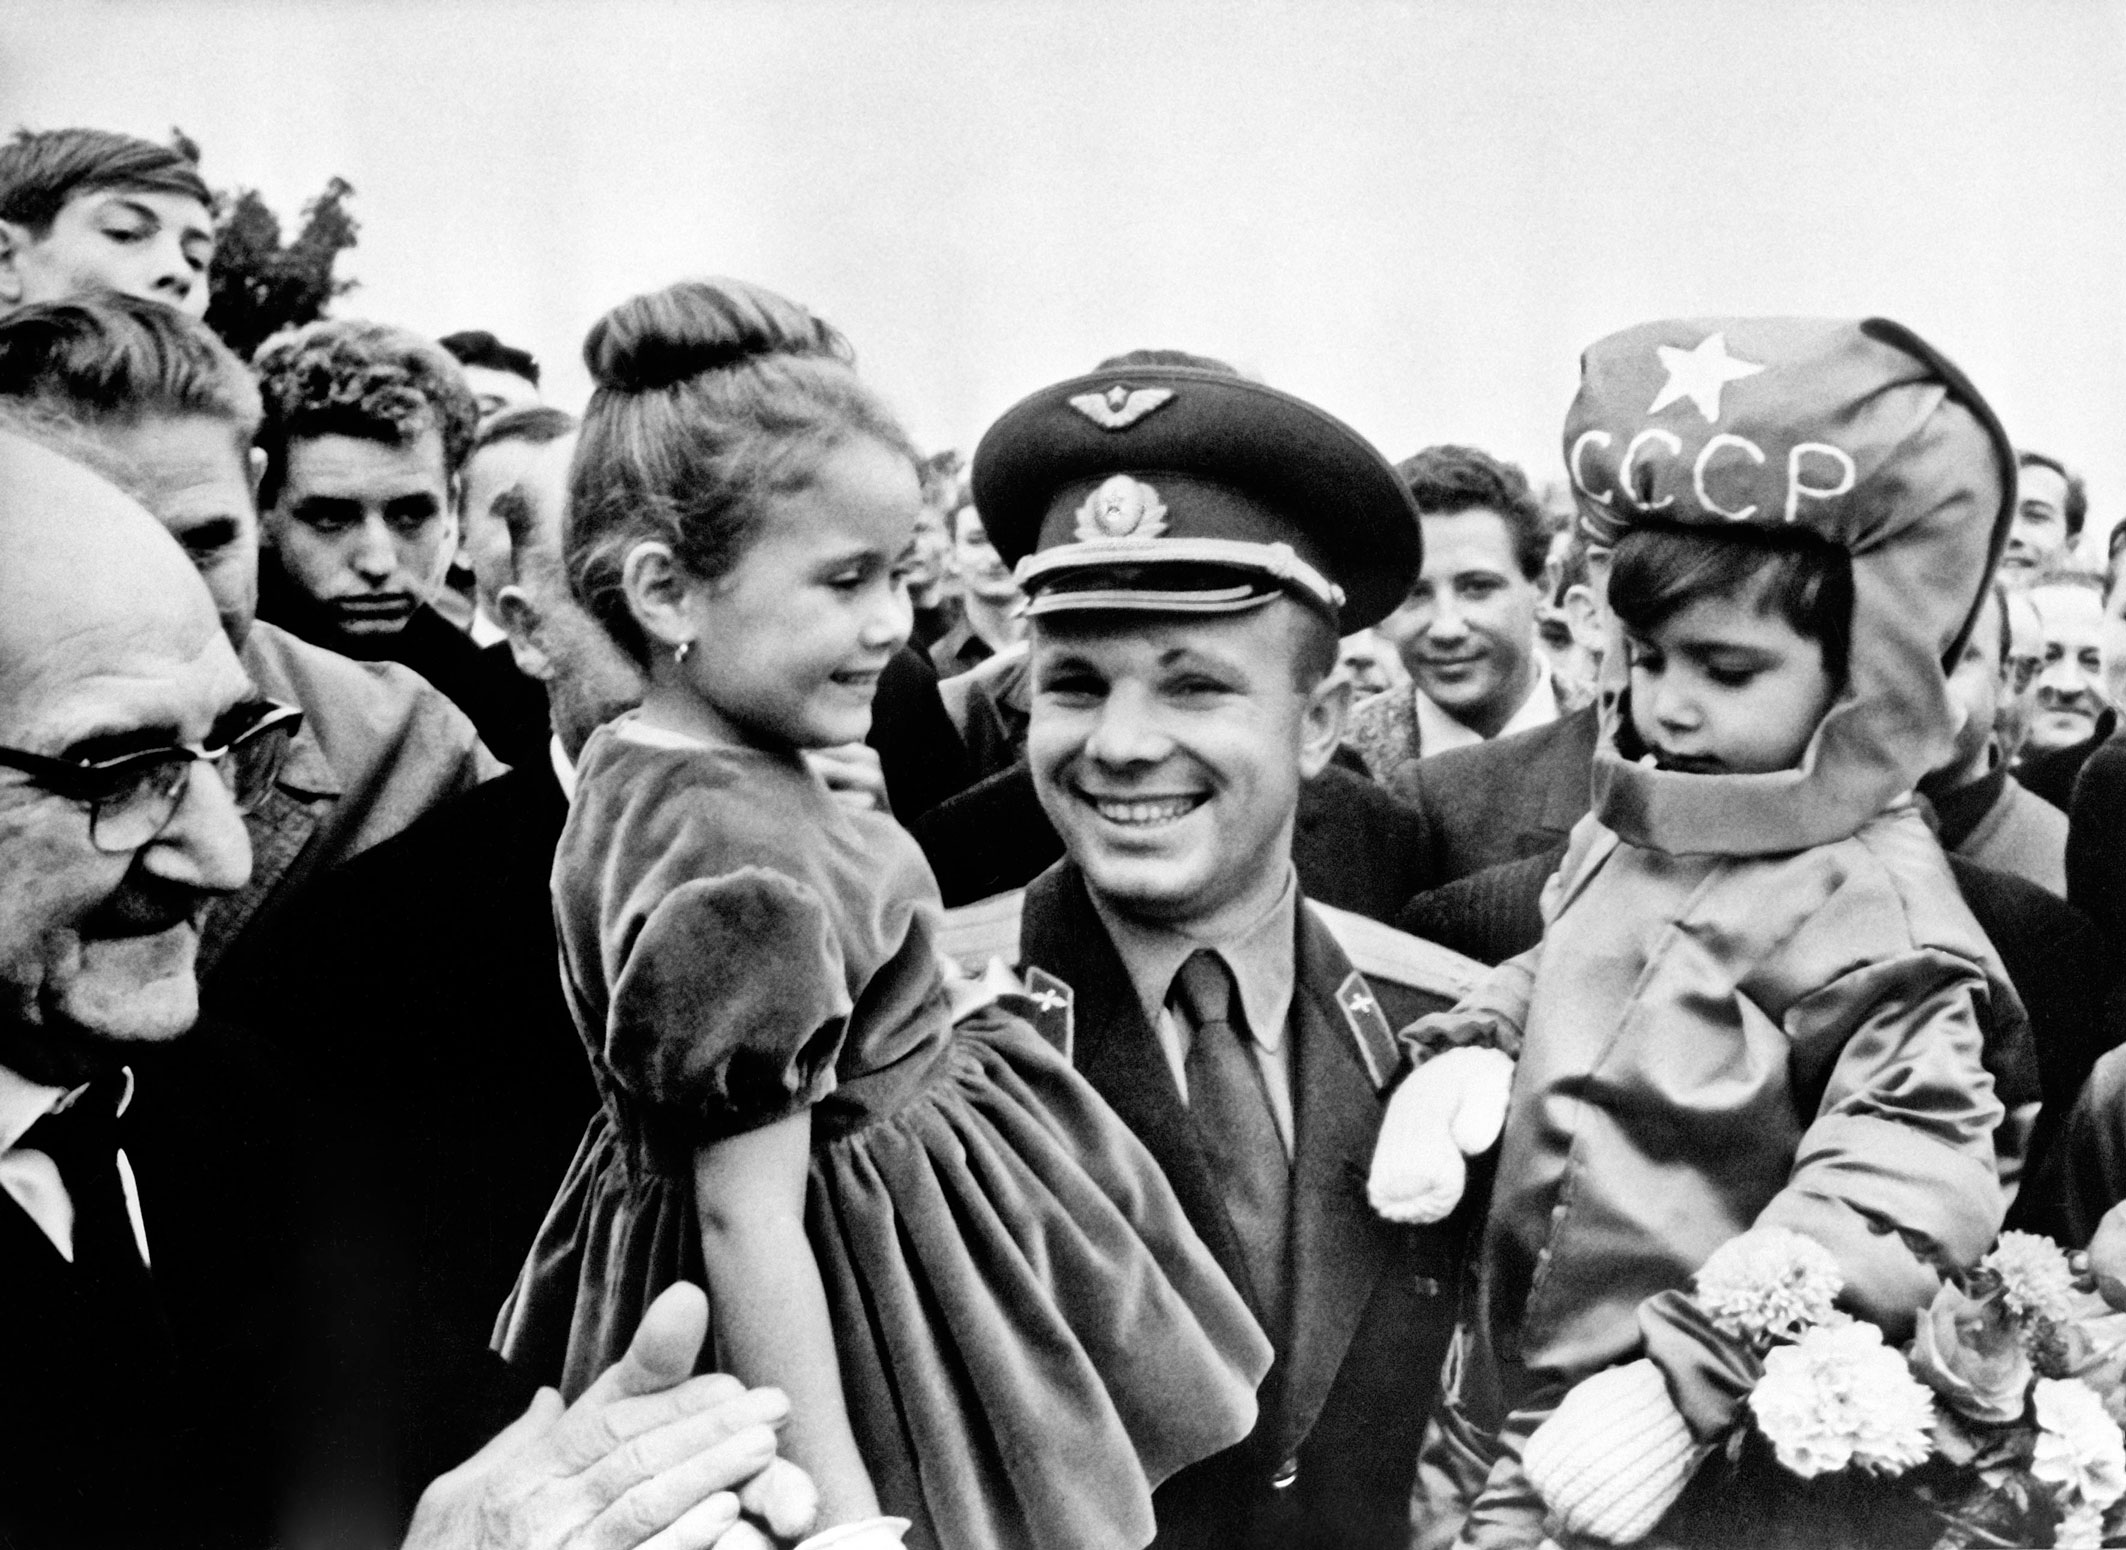 Yuri Gagarin, the first man in space, during his visit to France.